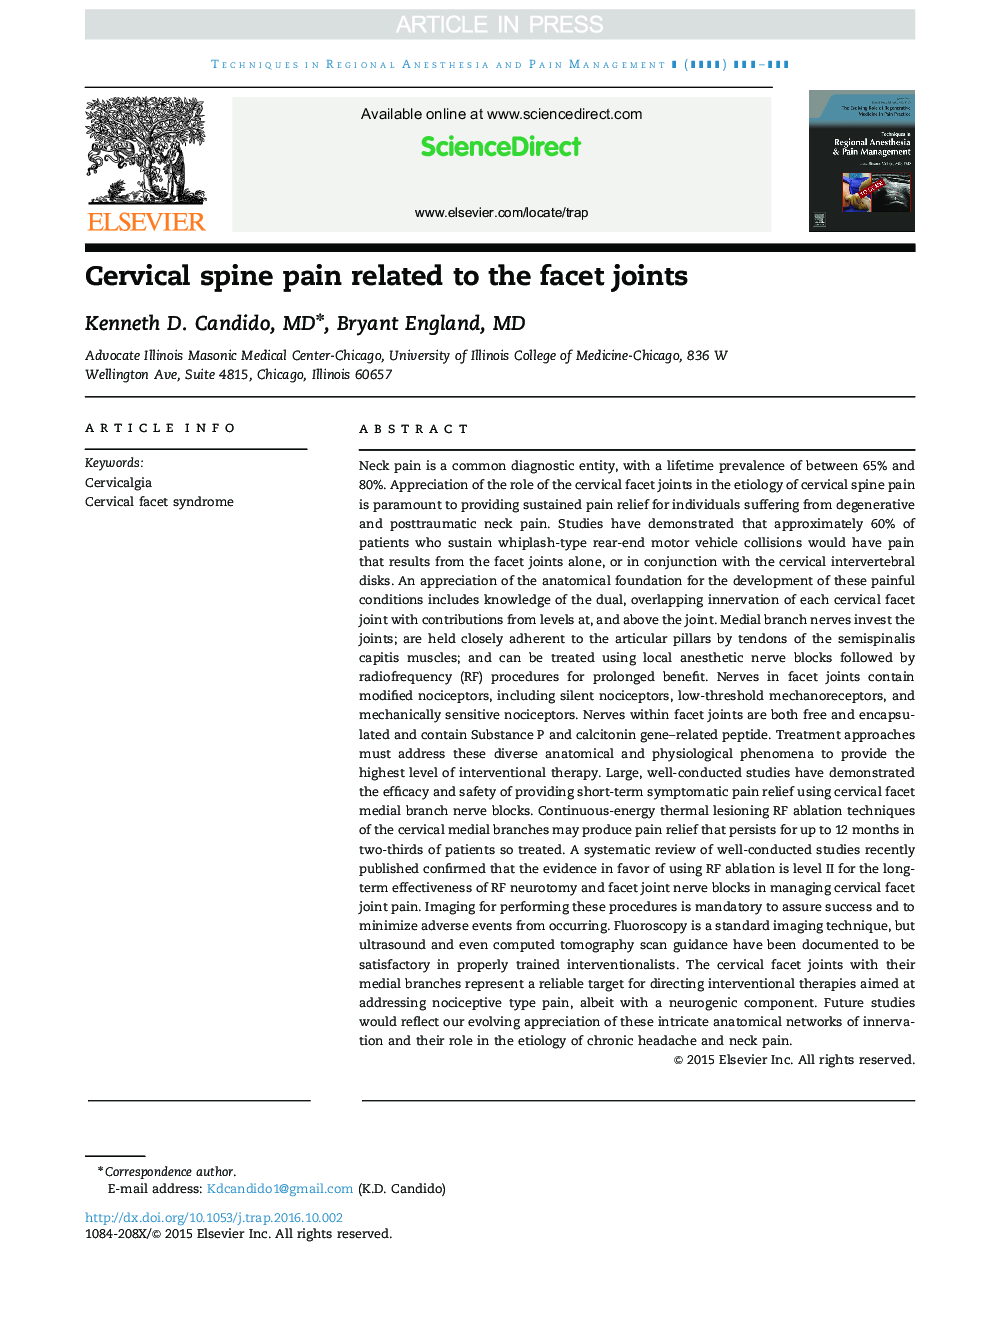 Cervical spine pain related to the facet joints